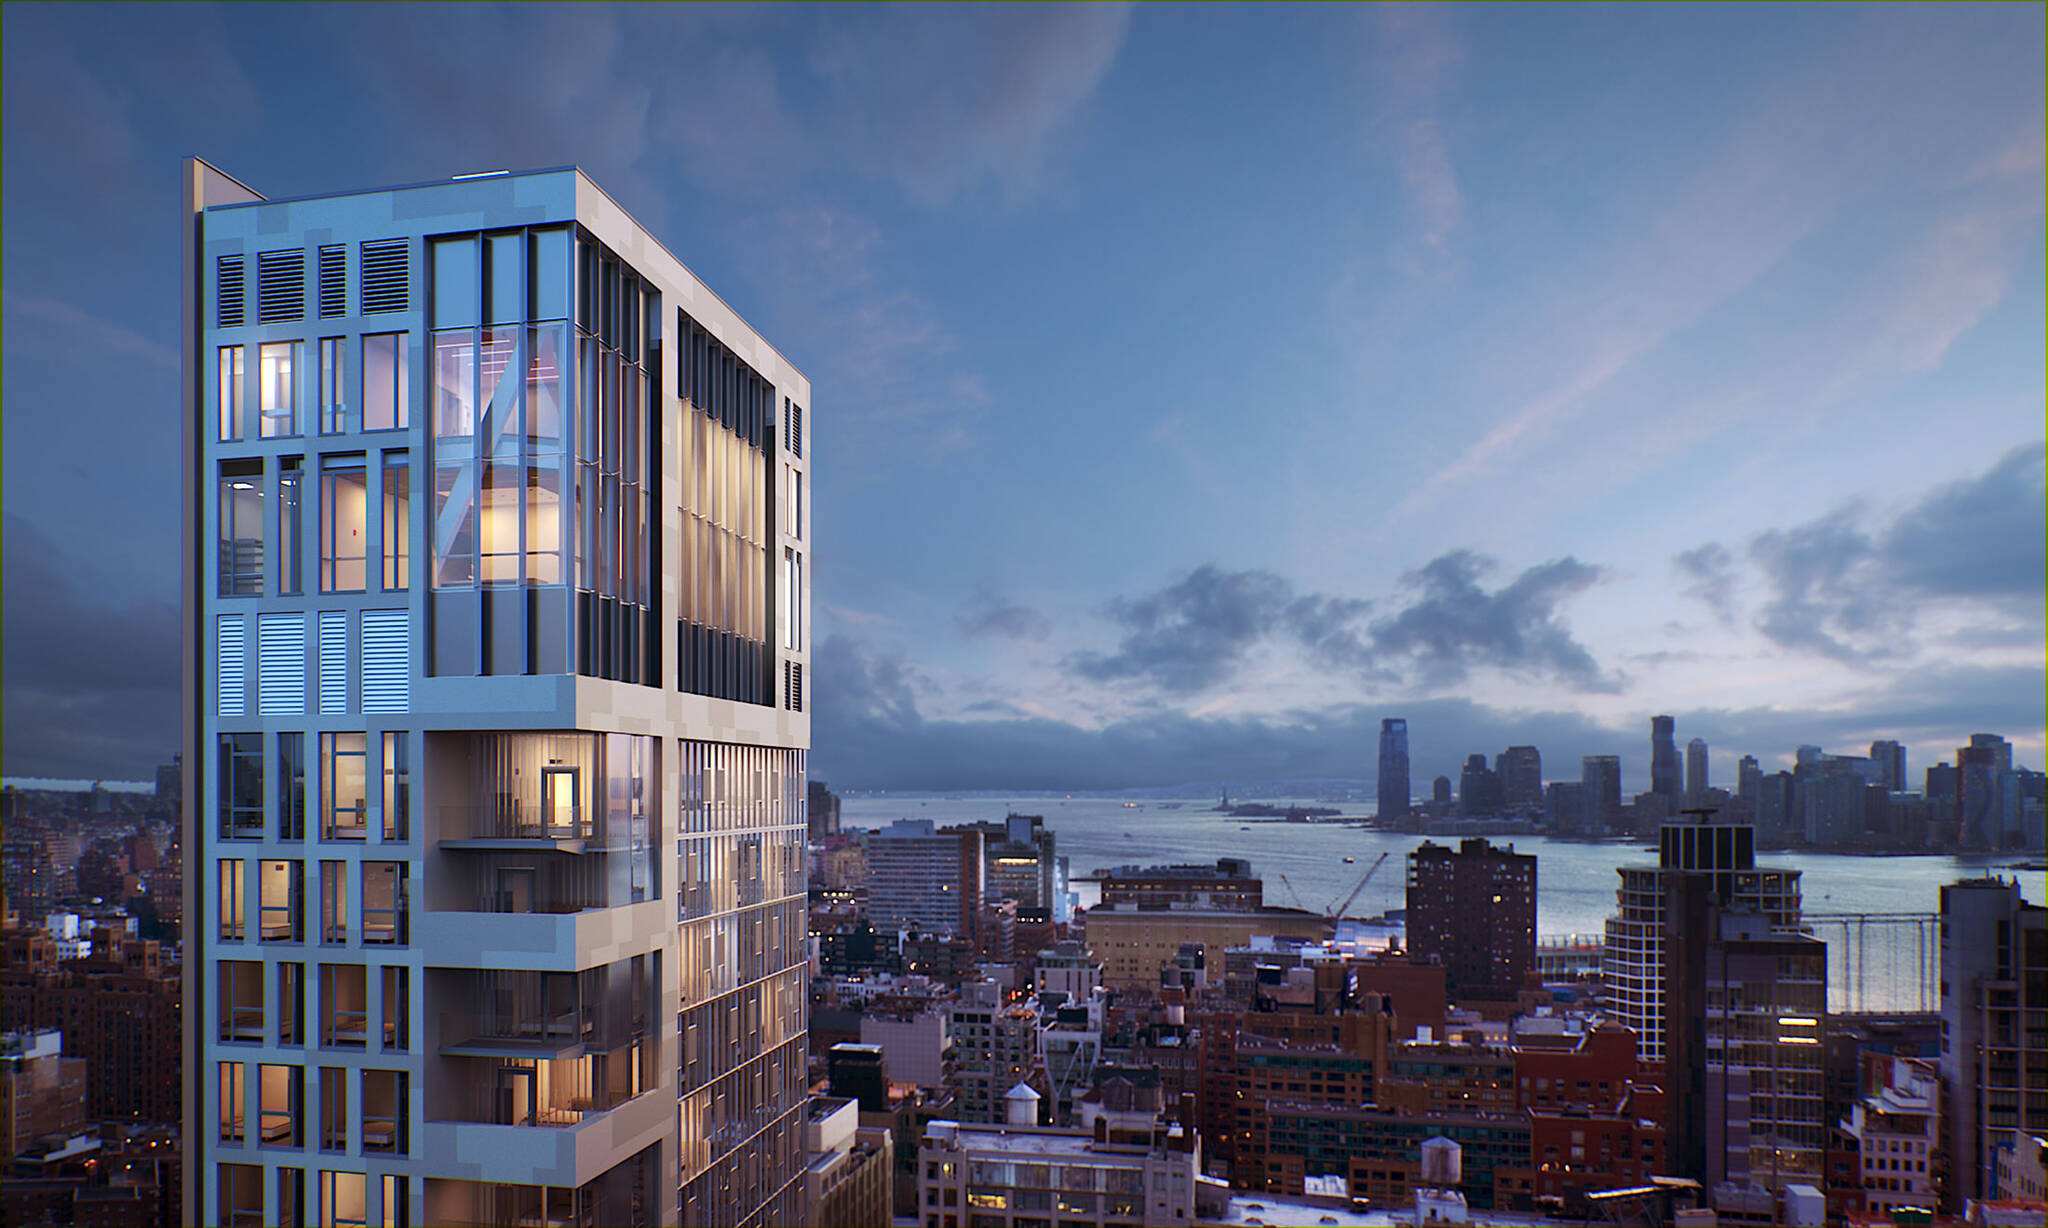 Aerial view from the outside of the Hudson Yards Autograph Hotel project by Marriott, a modular hotel tower located at 432 West 31st Street in Hudson Yards, New York City designed by the architecture studio Danny Forster & Architecture